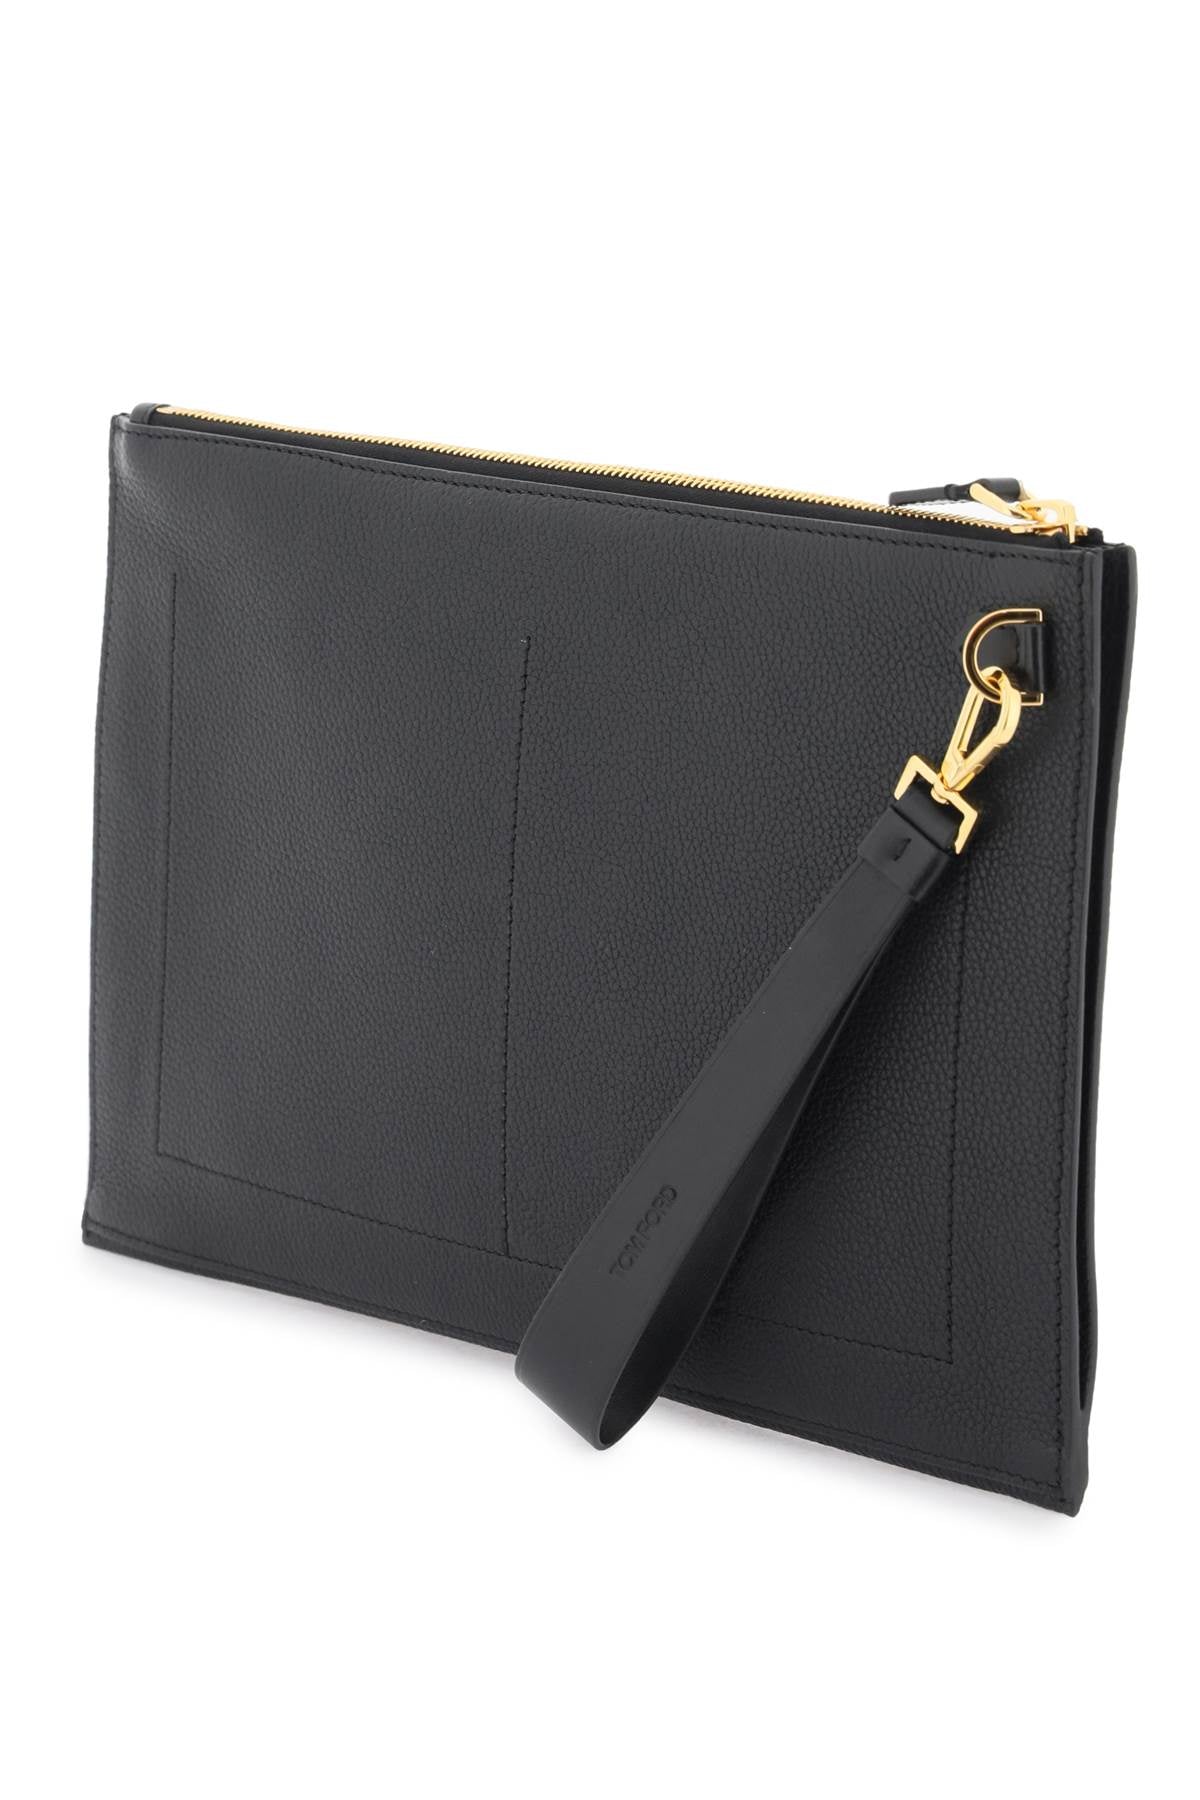 Tom ford grained leather pouch-1